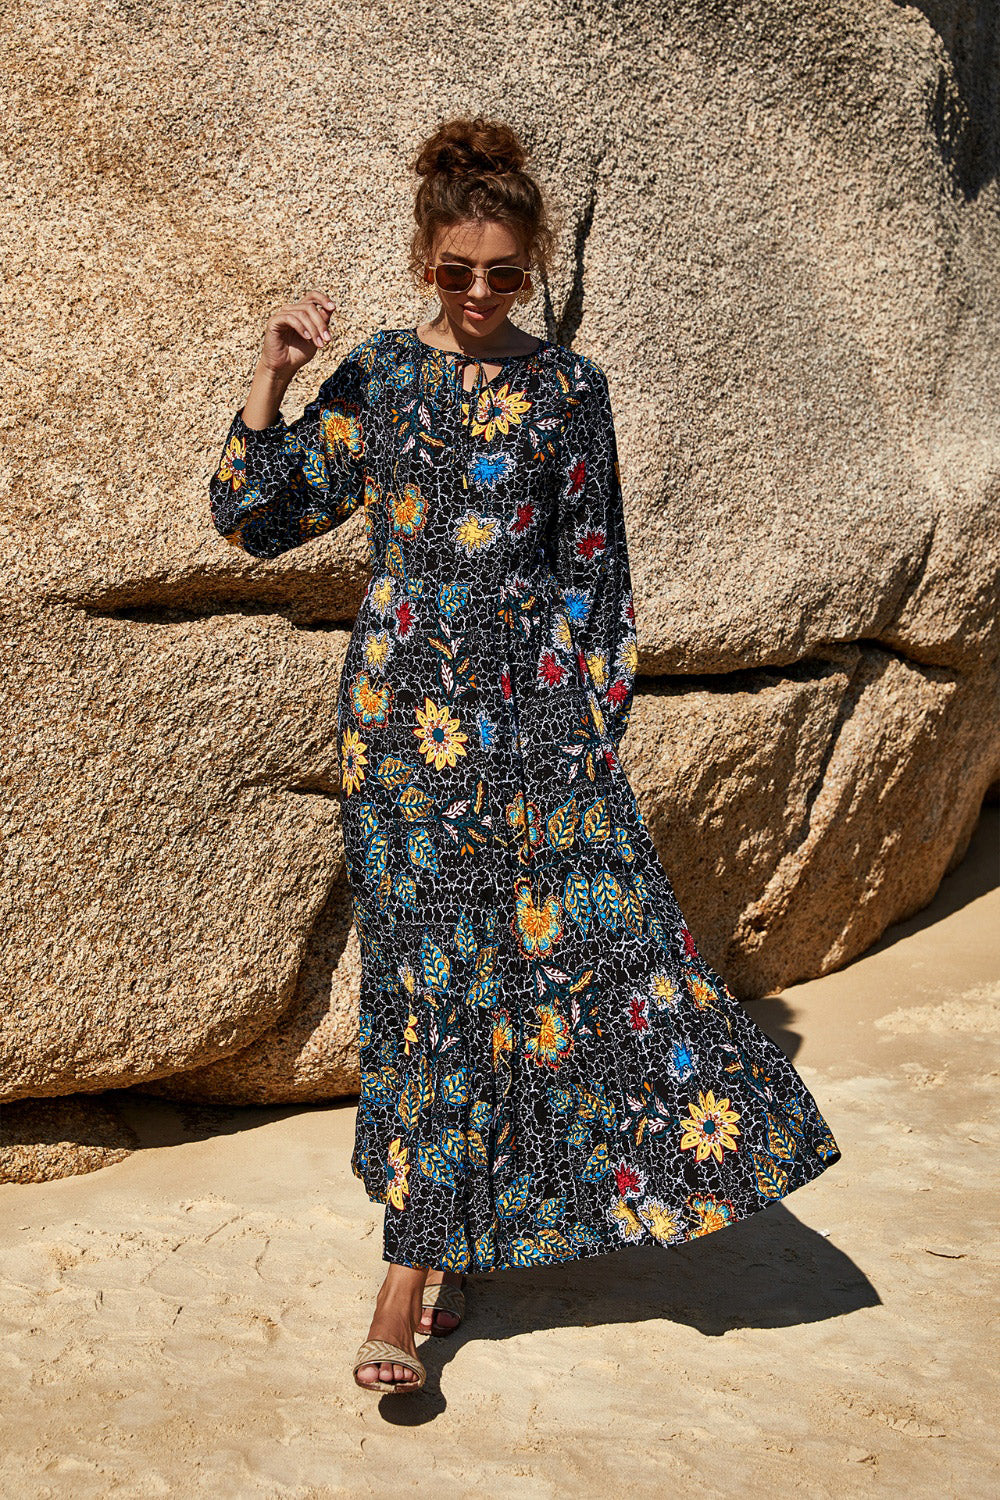 Elegant Printed Tie Neck Long Sleeve Dress for Women Over 50 - Perfect Summer Beach Wedding Guest Party Attire